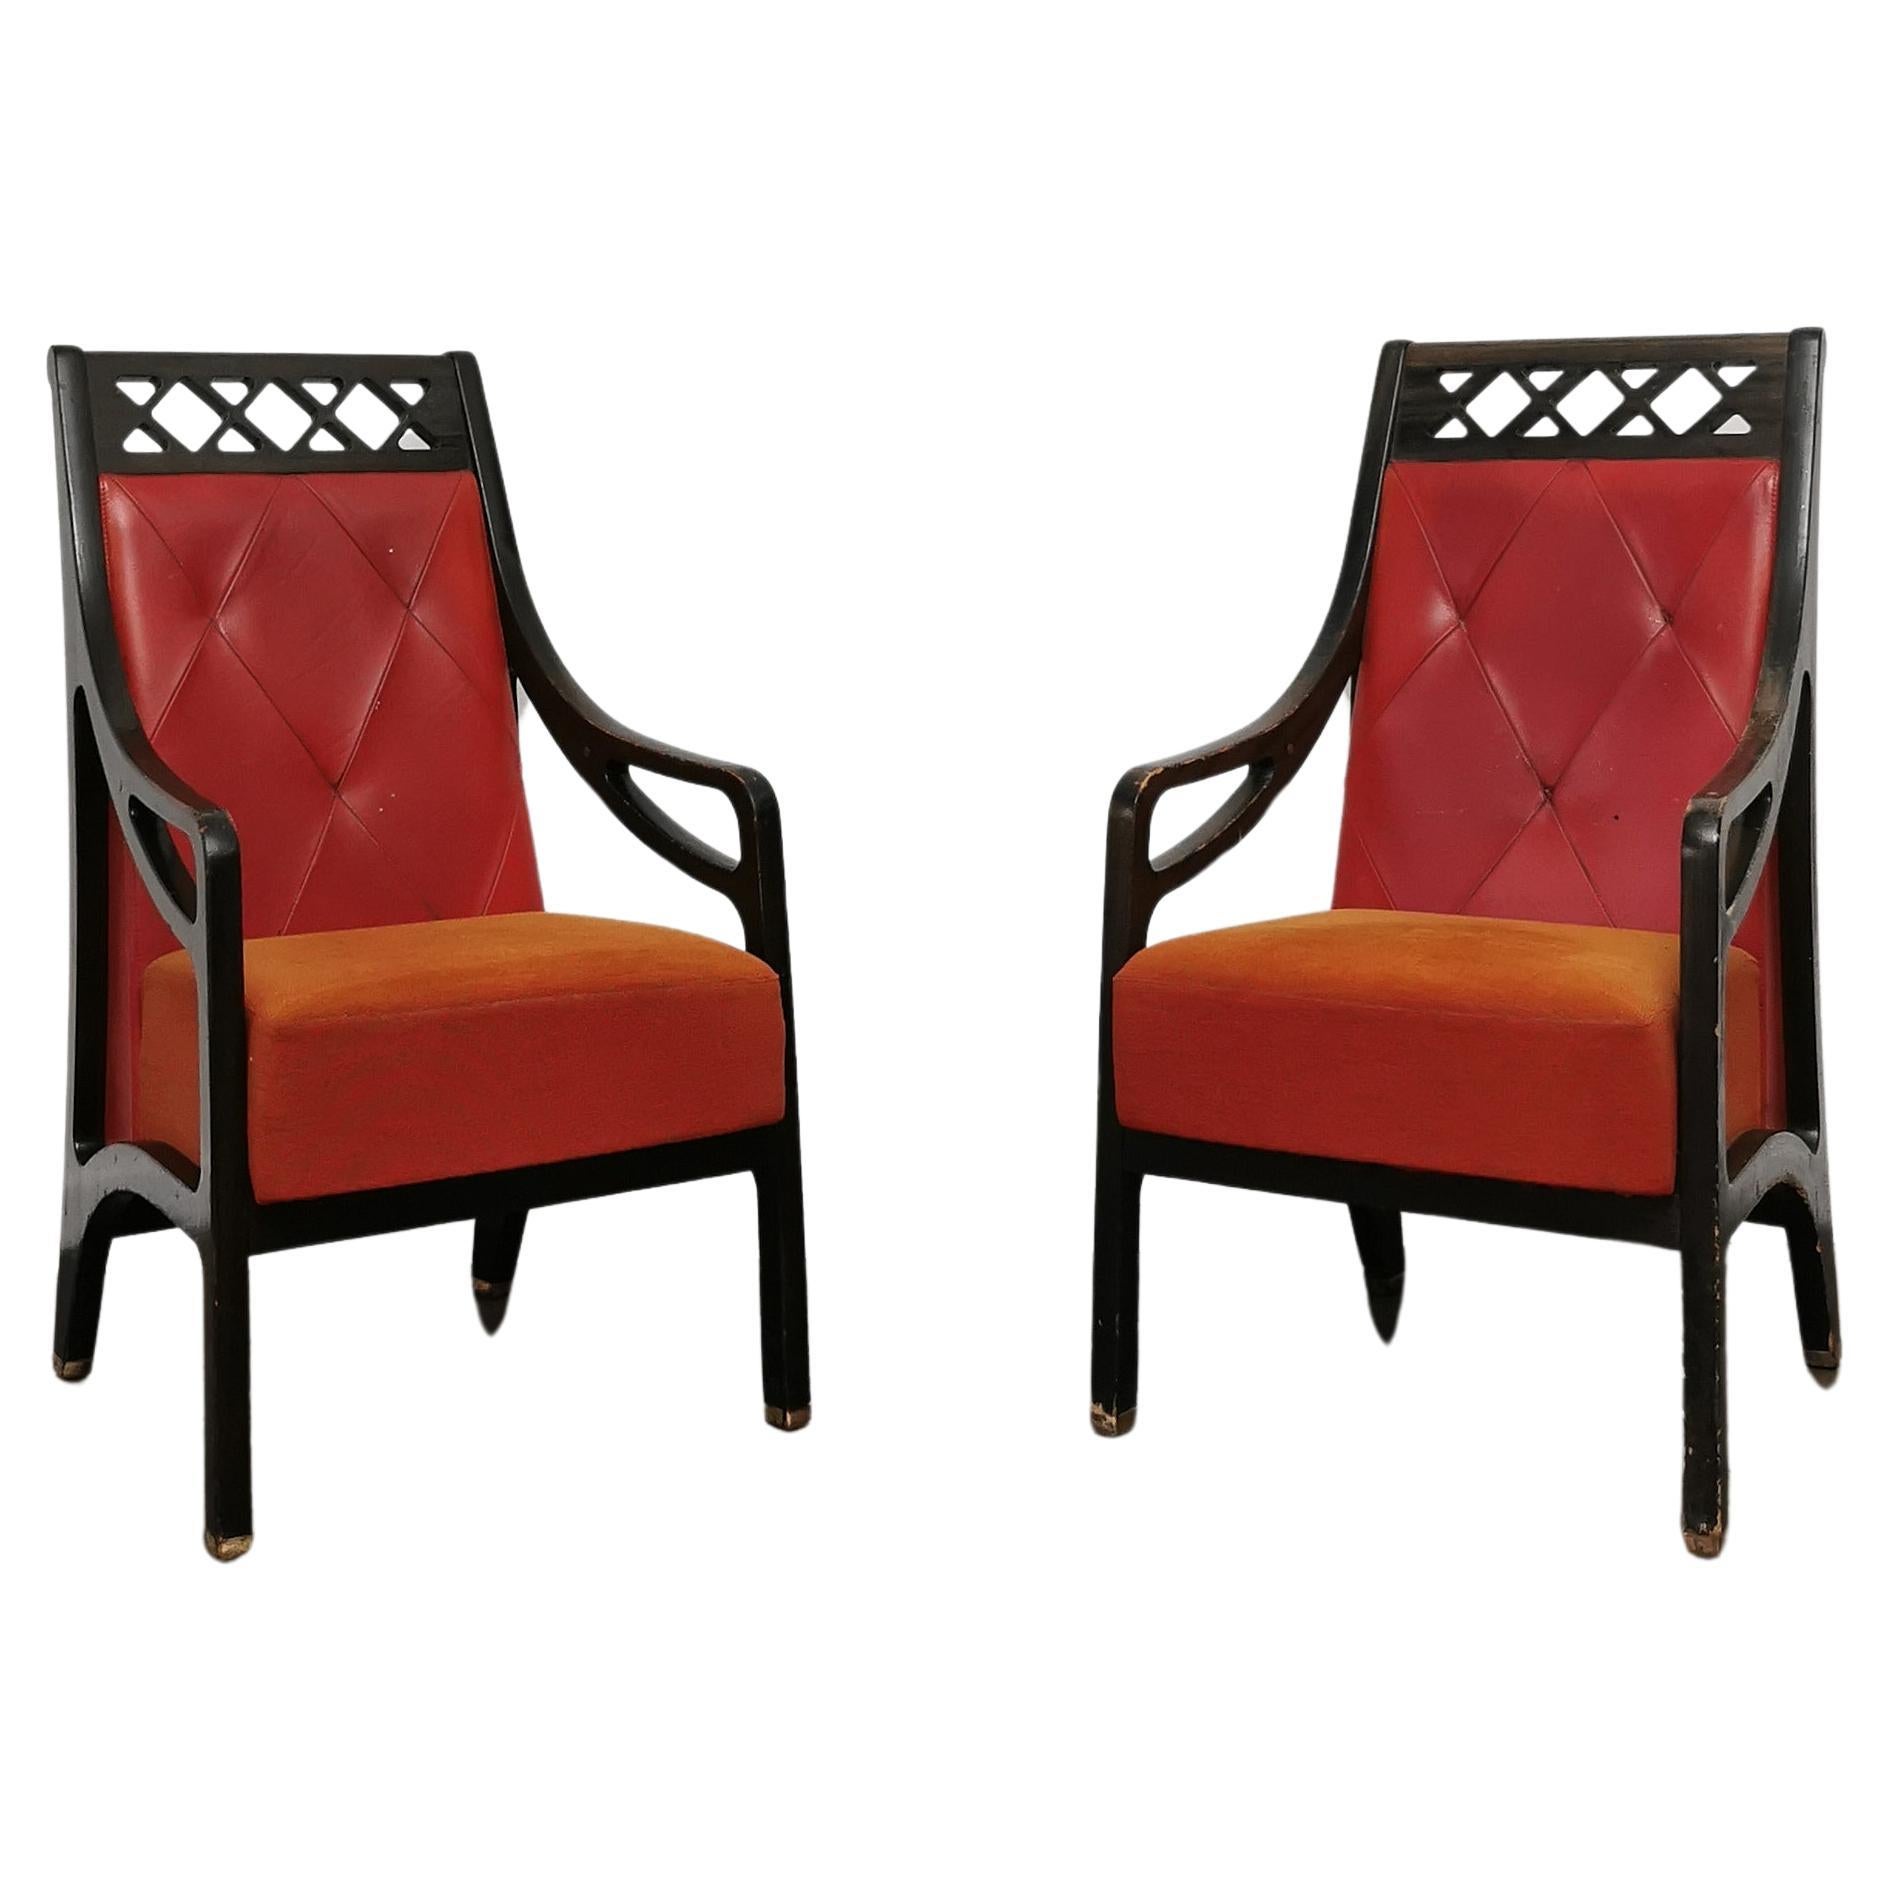 Set of 2 rare armchairs produced in Italy in the 1930s/40s, which were found in an ancient villa in Palermo. Each single armchair with a particular line was made with a solid wood structure, a striped velvet seat and a red leather backrest on the